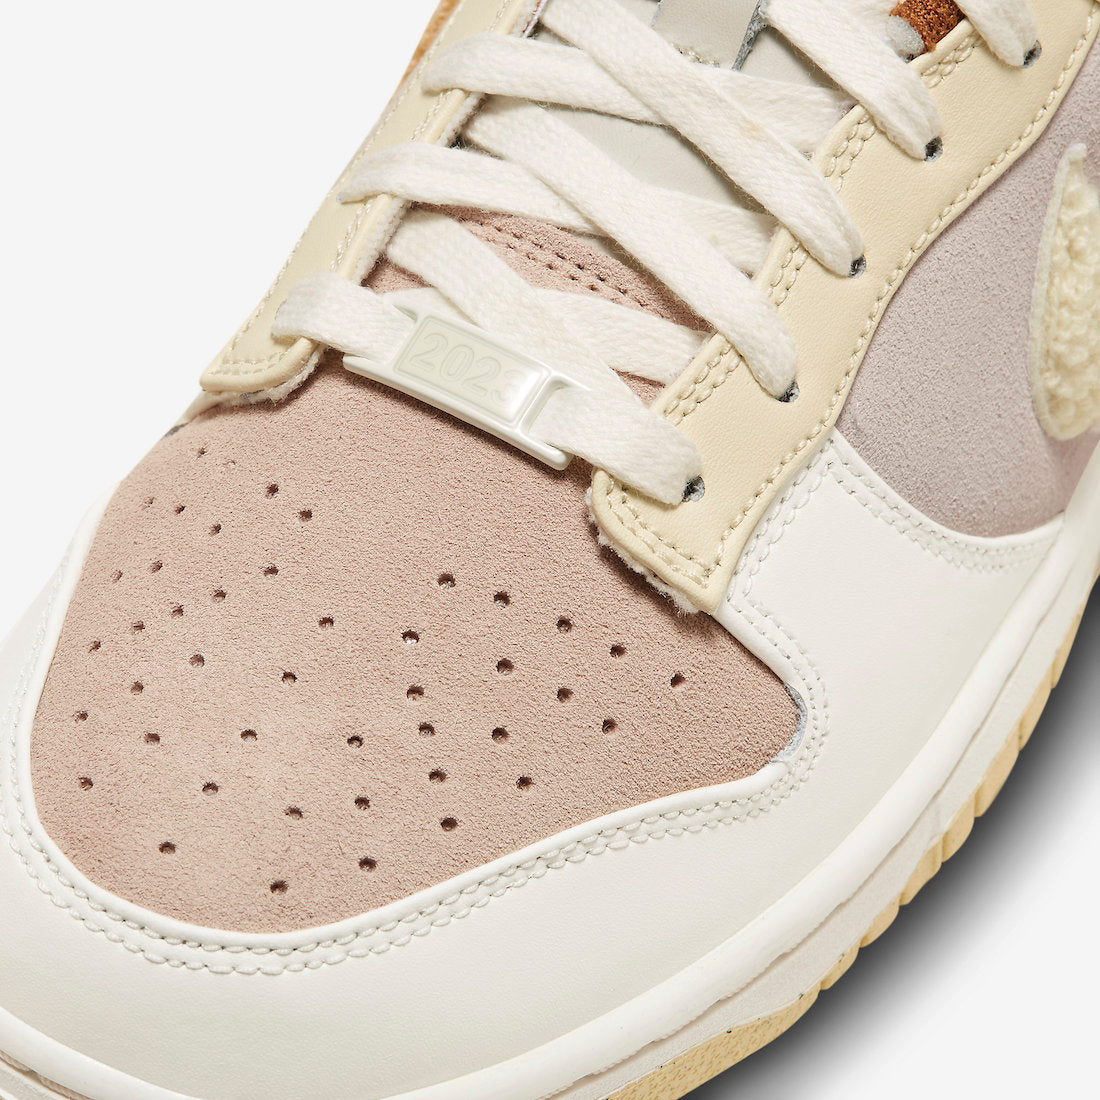 Nike Dunk Low “Year of the Rabbit – White / Taupe”